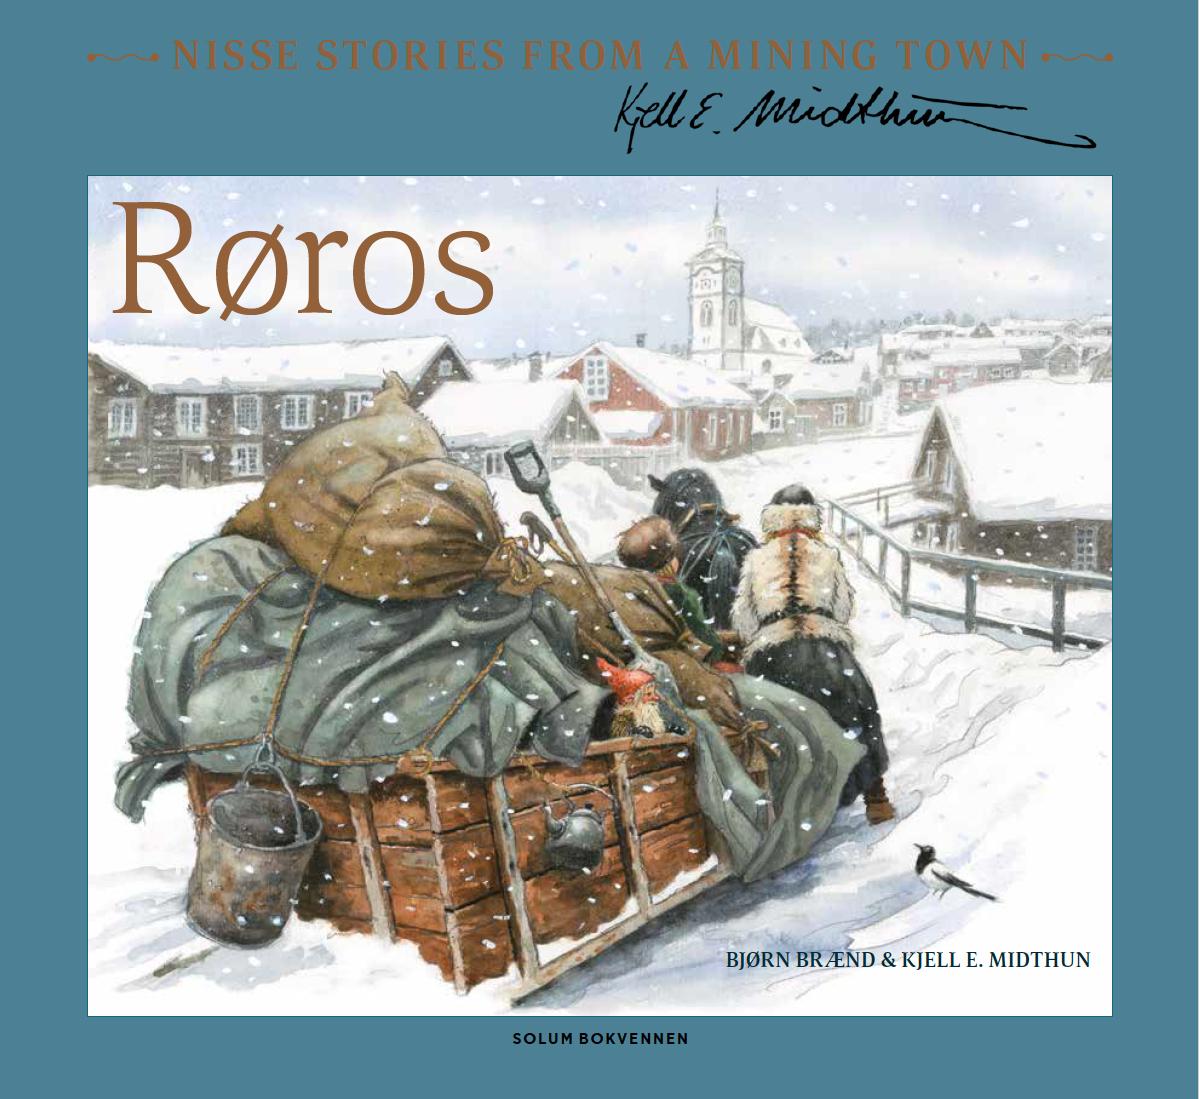 Røros: nisse stories from a mining town